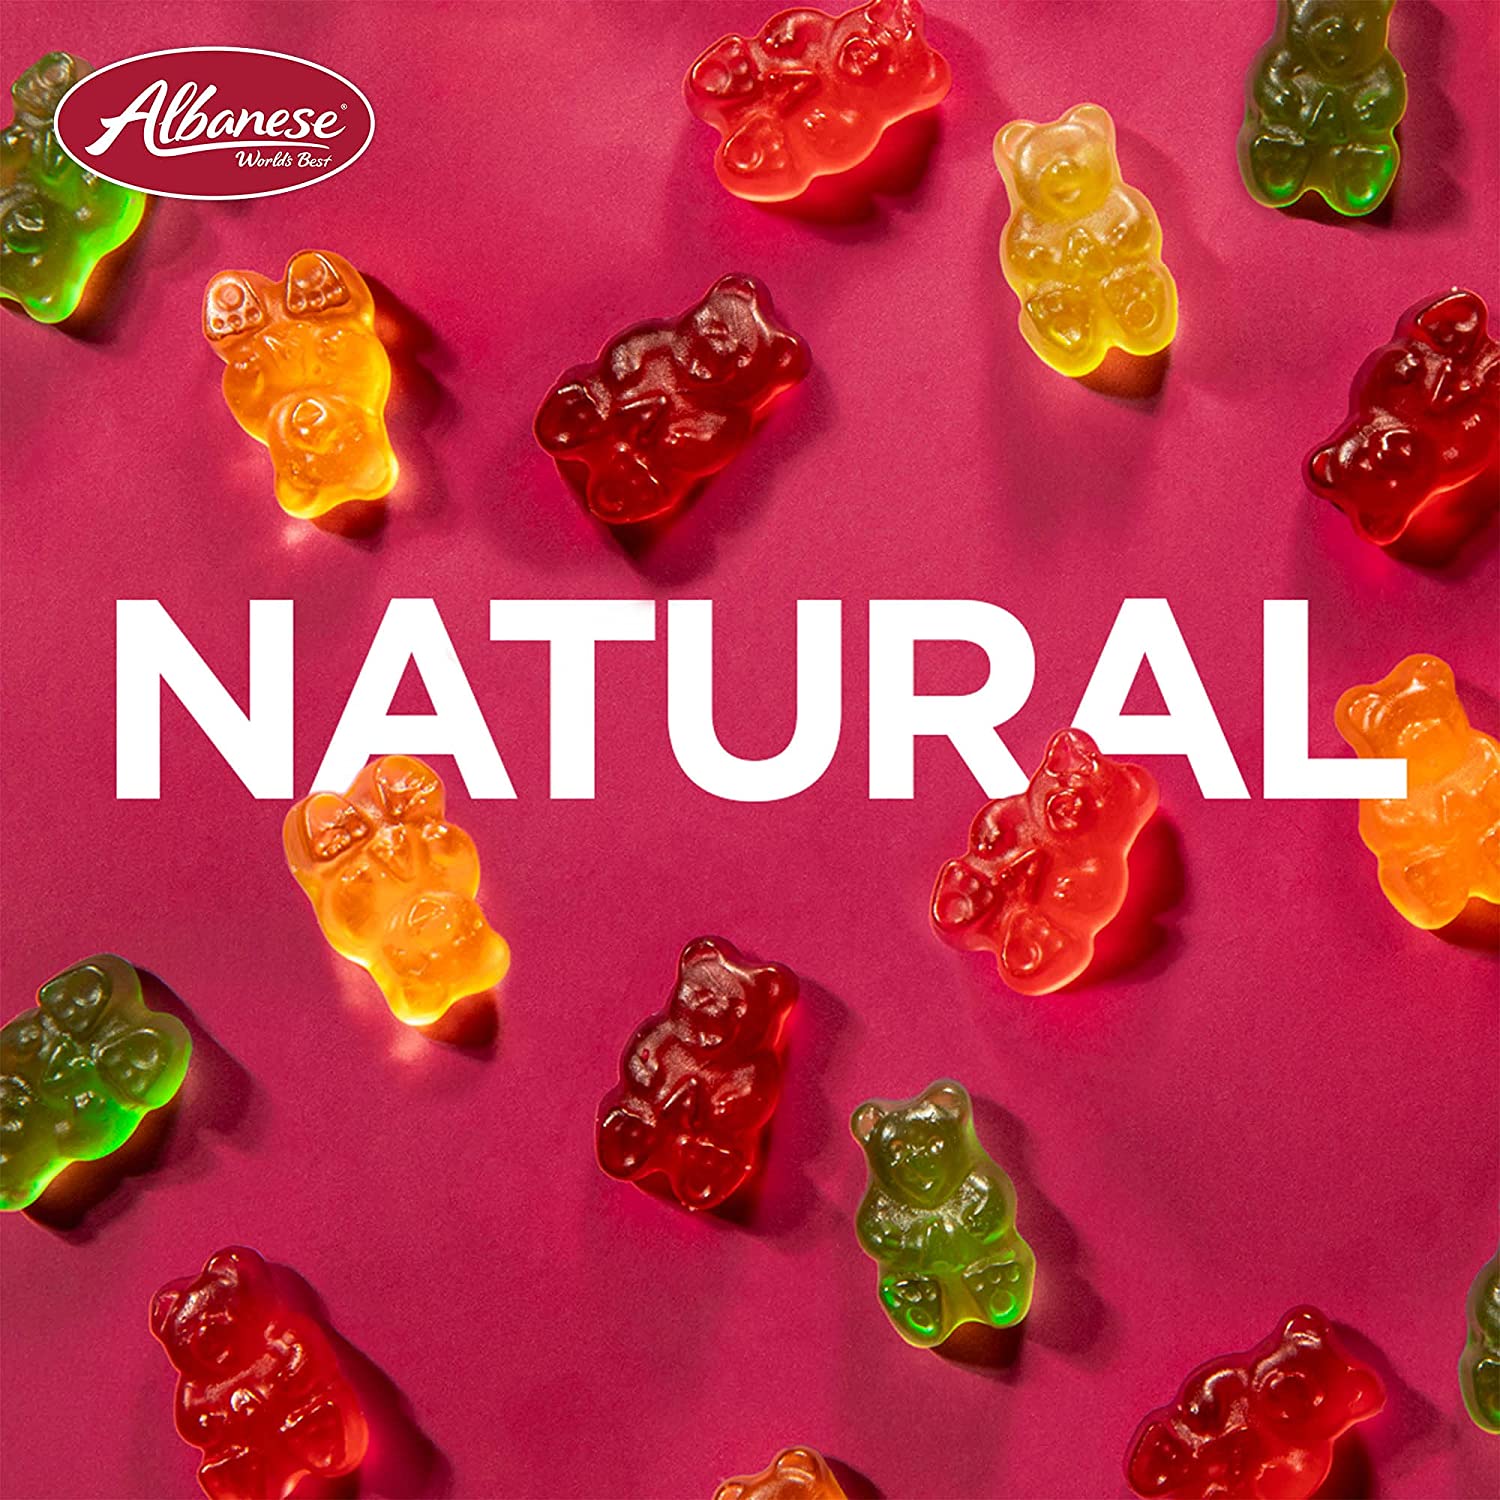 Albanese Confectionery-5 Natural Flavor Gummi Bears 5 lb. Bag-50270-Legacy Toys